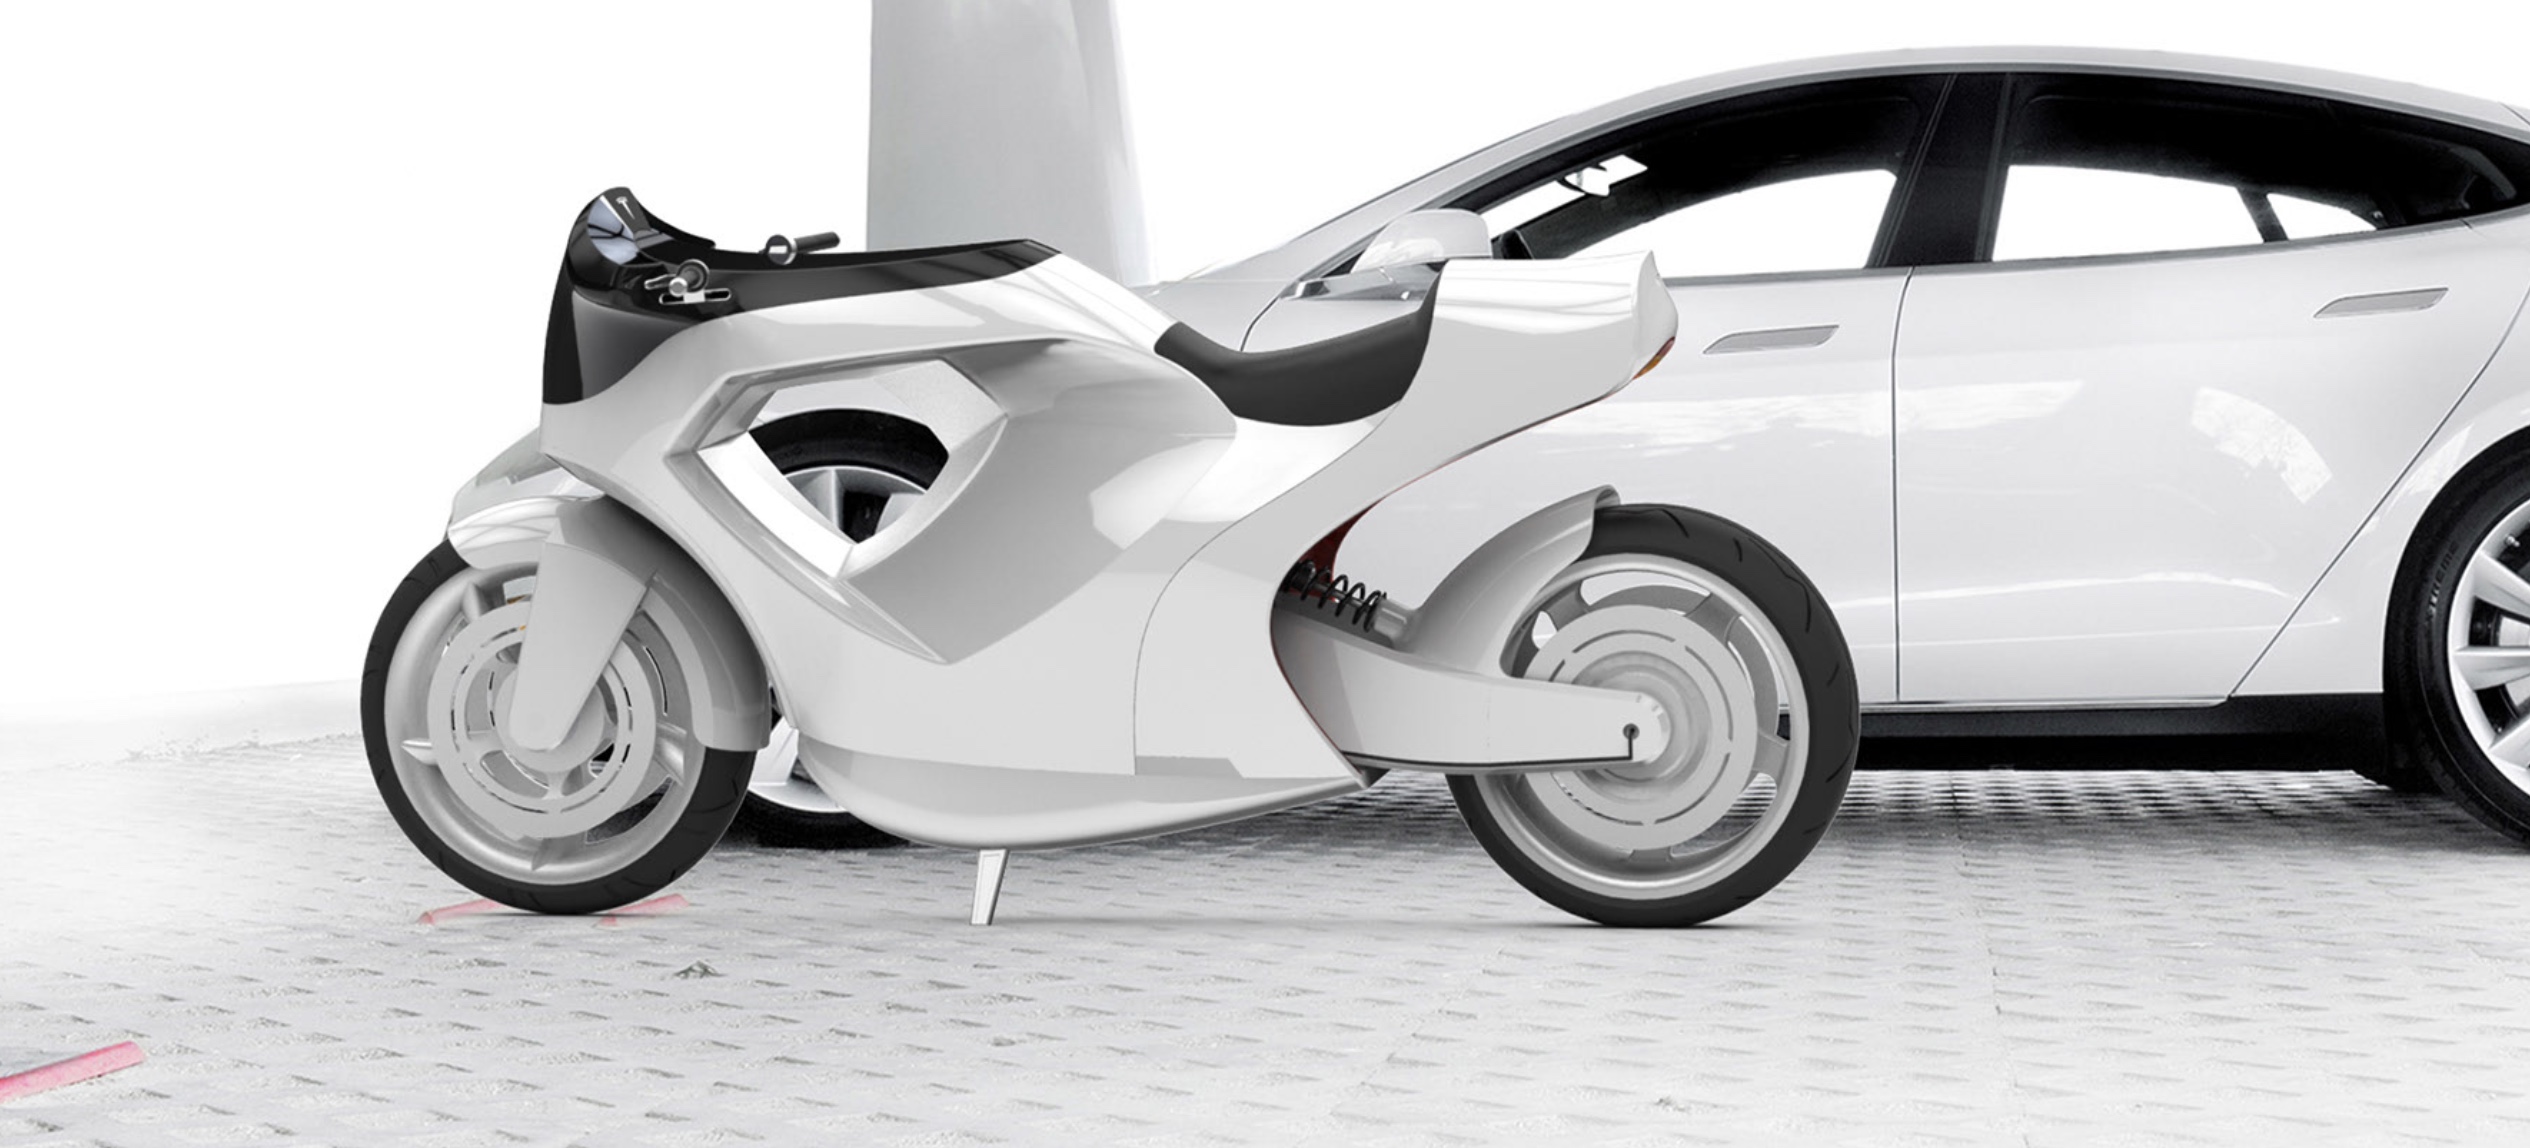 This Tesla electric motorcycle concept makes you wish Elon Musk didn't  almost die on a bike